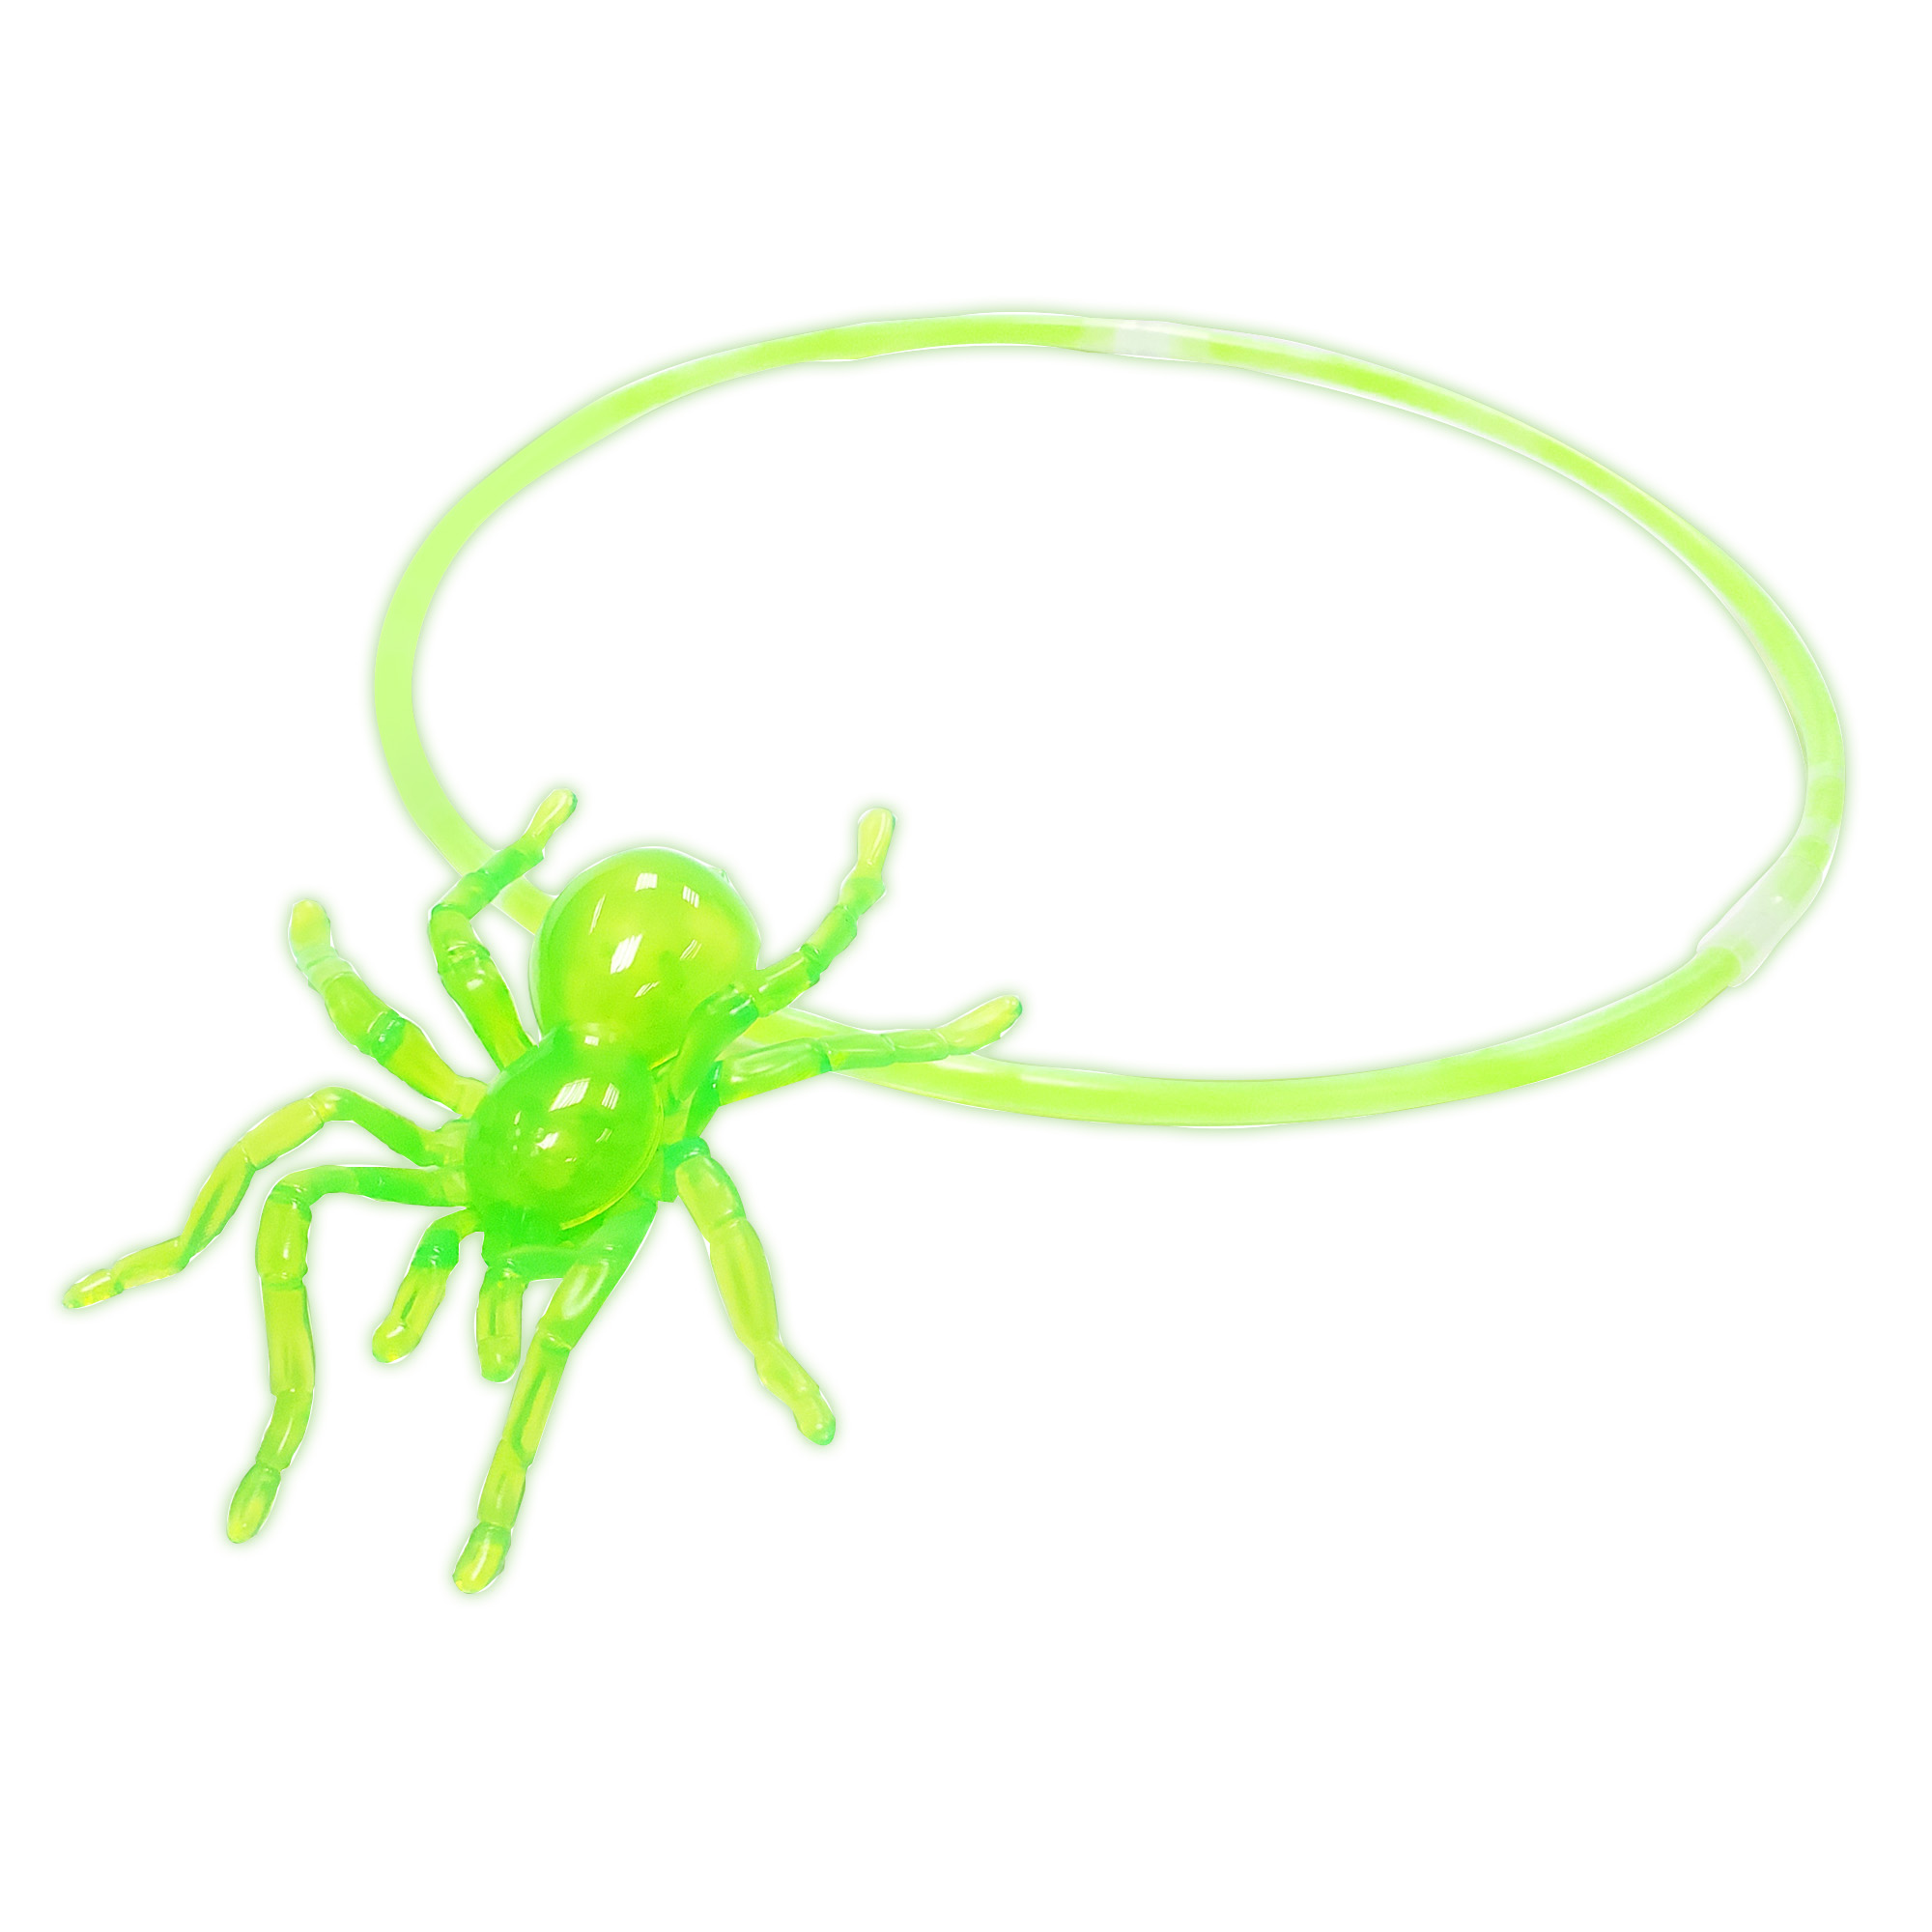 Vendor Labelling Halloween 1ct Green Glow Spider Necklace, Unisex - Childs and Adults - image 3 of 7